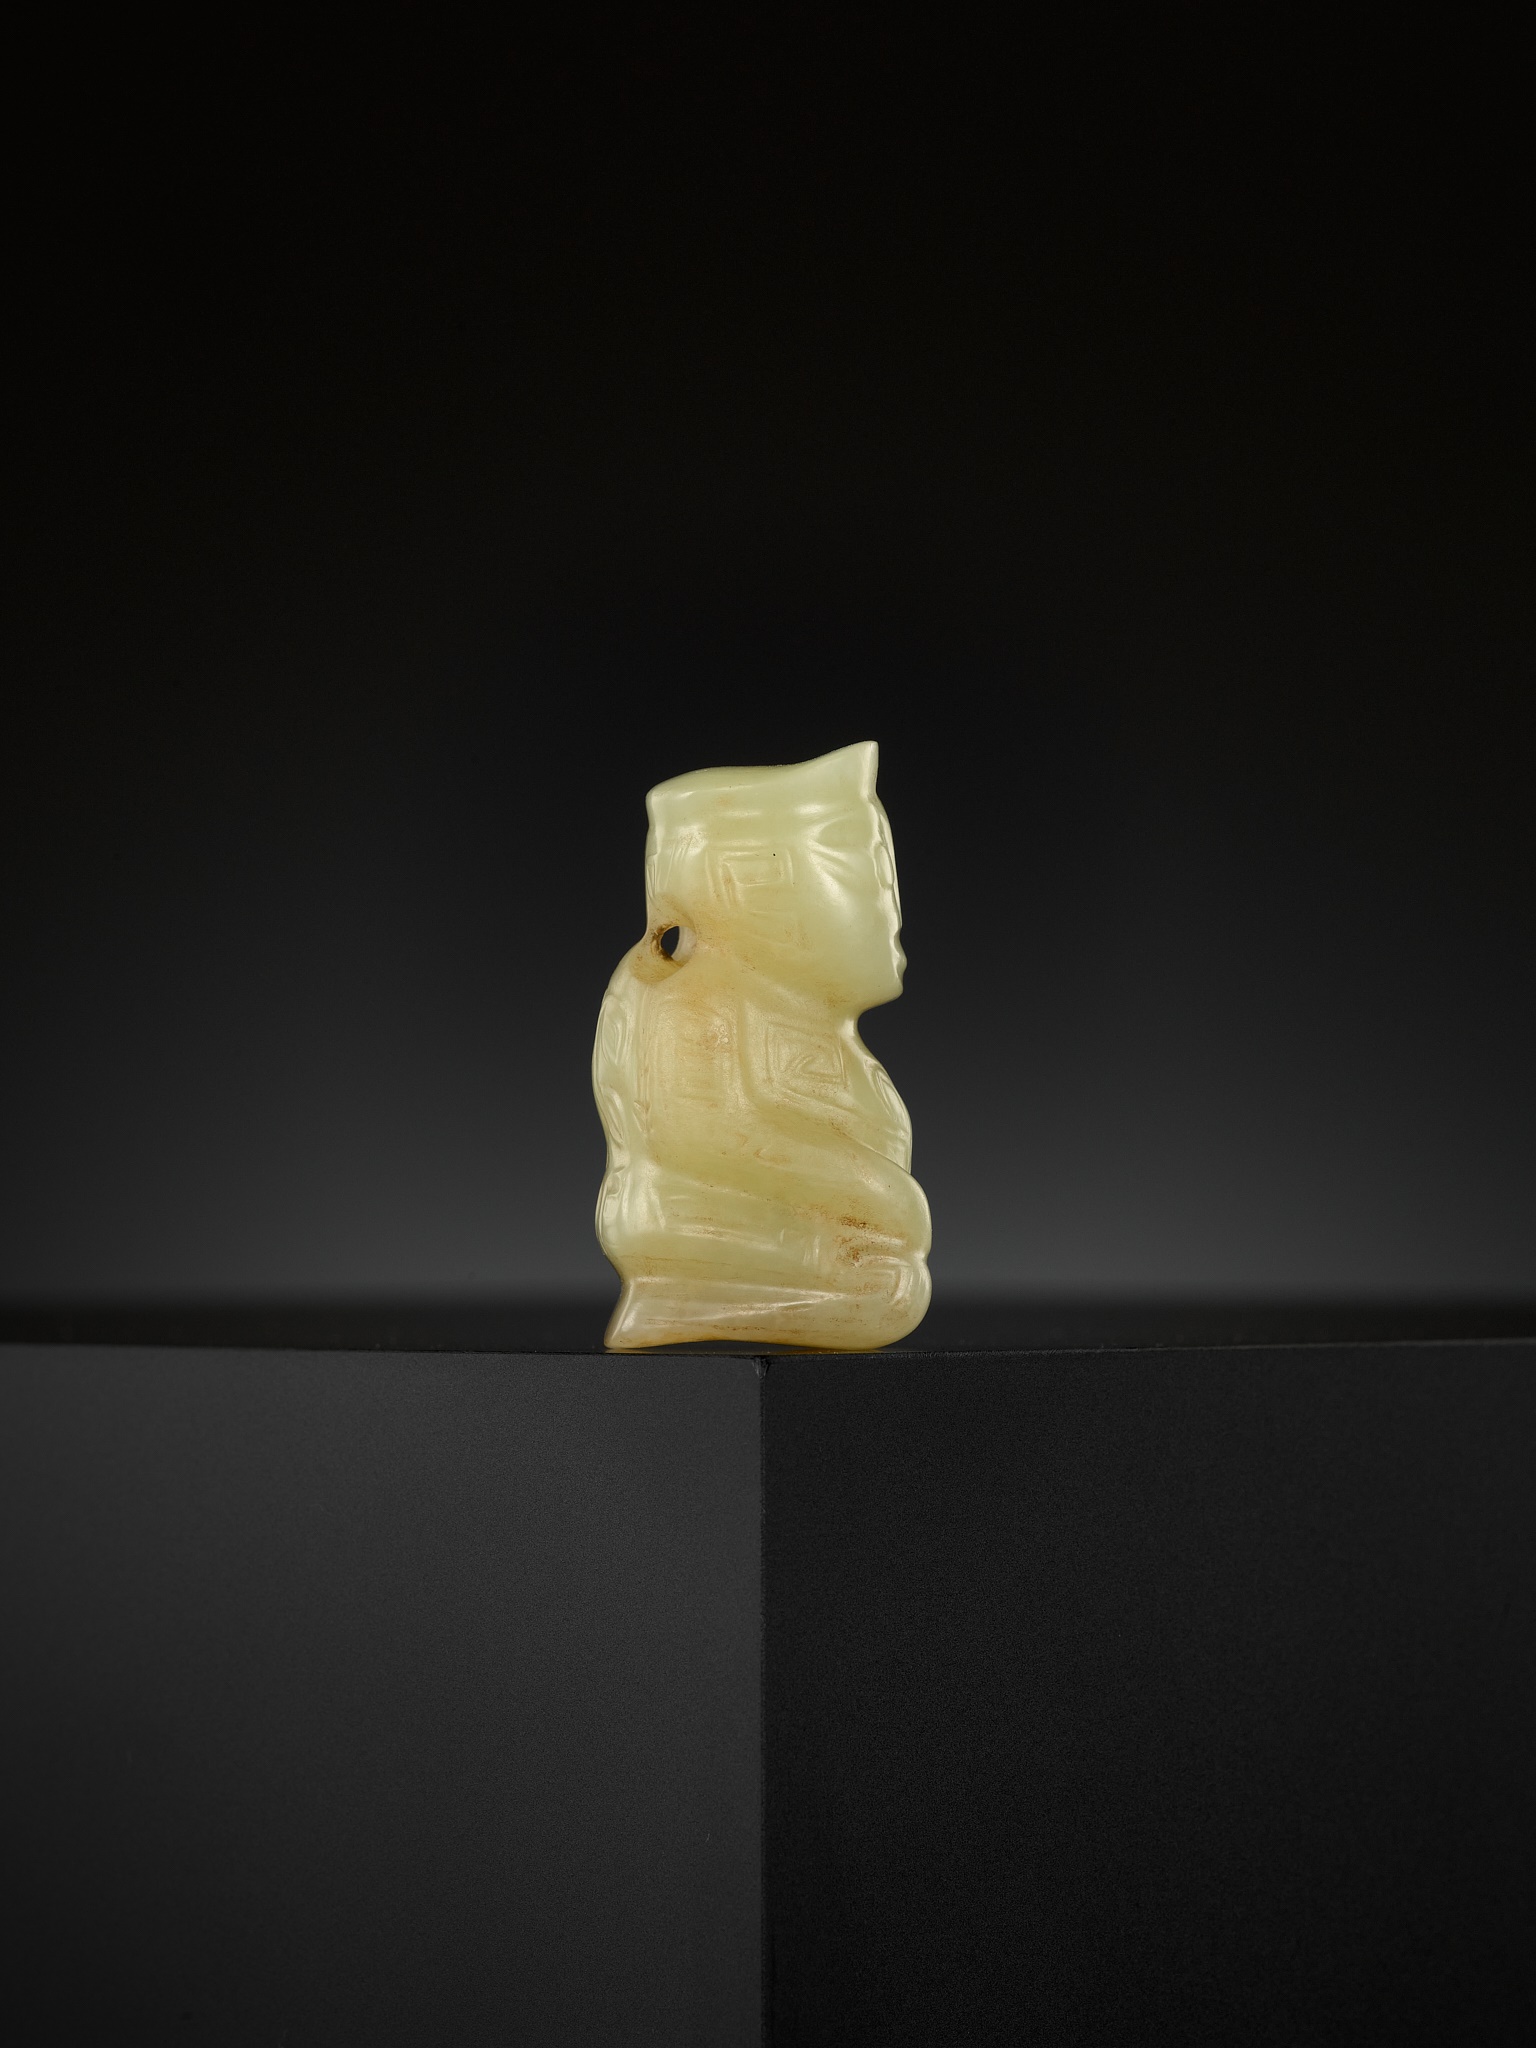 AN EXTREMELY RARE YELLOW JADE 'KNEELING FIGURE', SHANG DYNASTY - Image 16 of 20